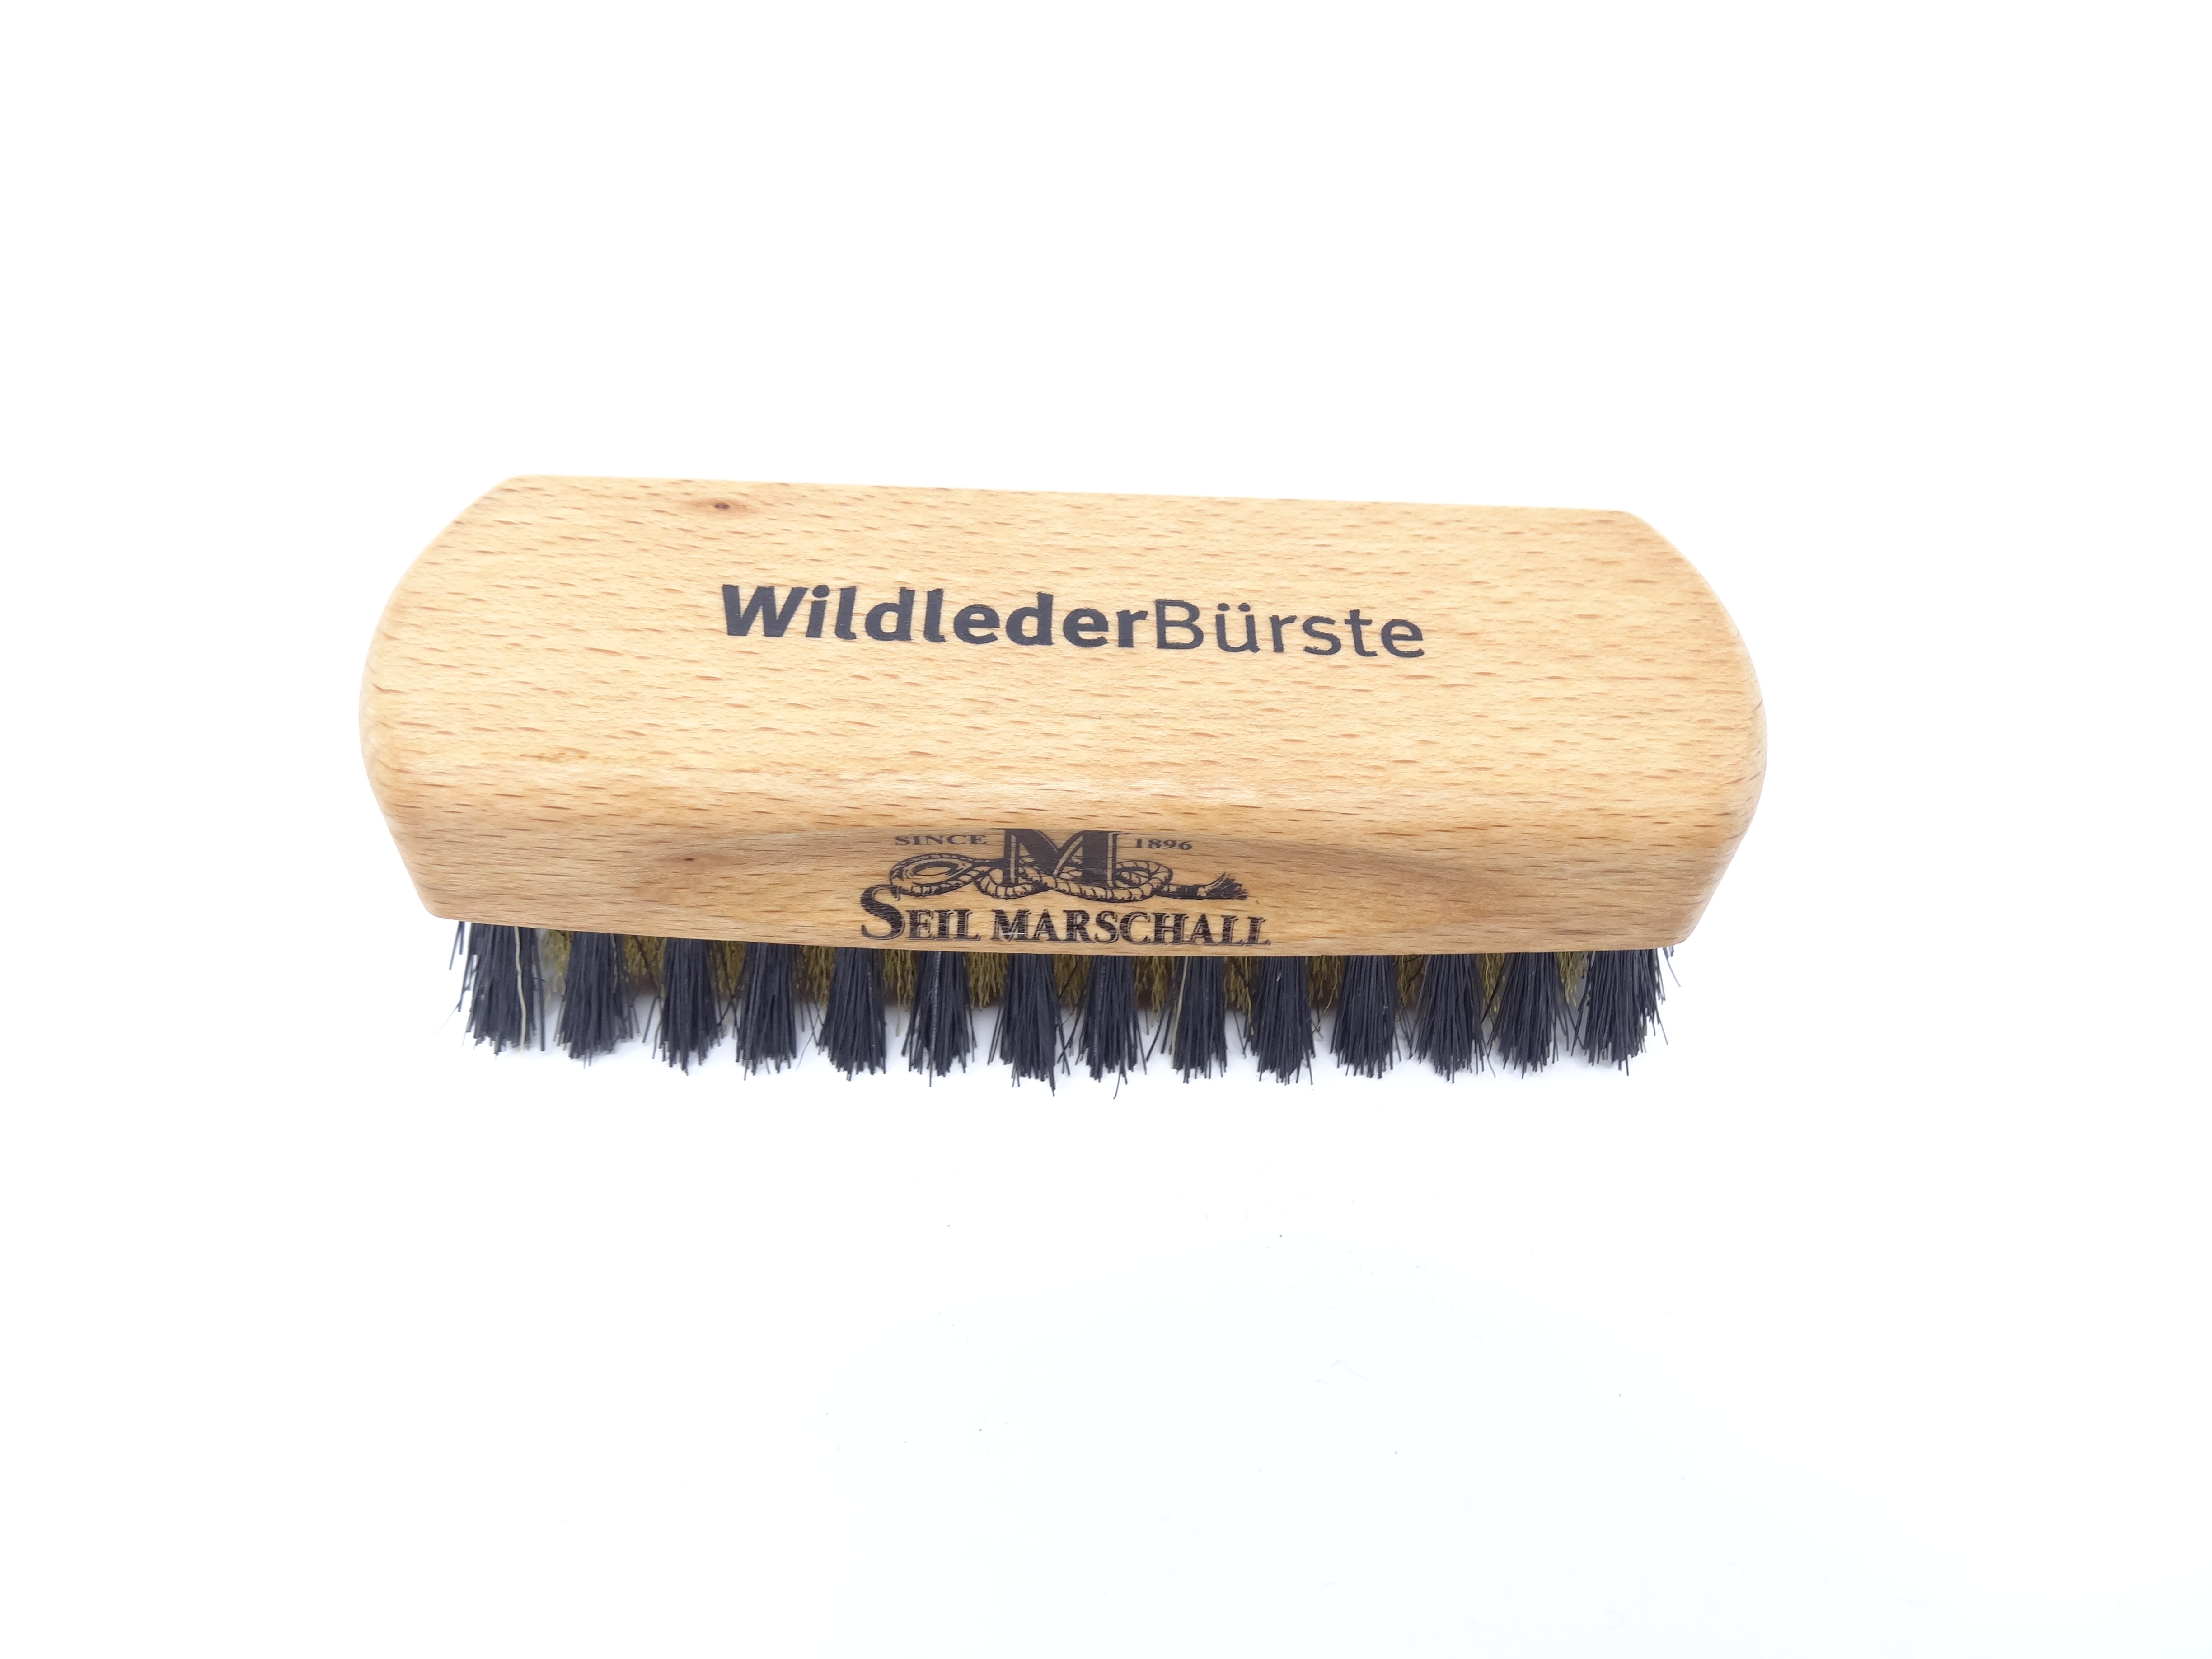 Suede Leather Brush